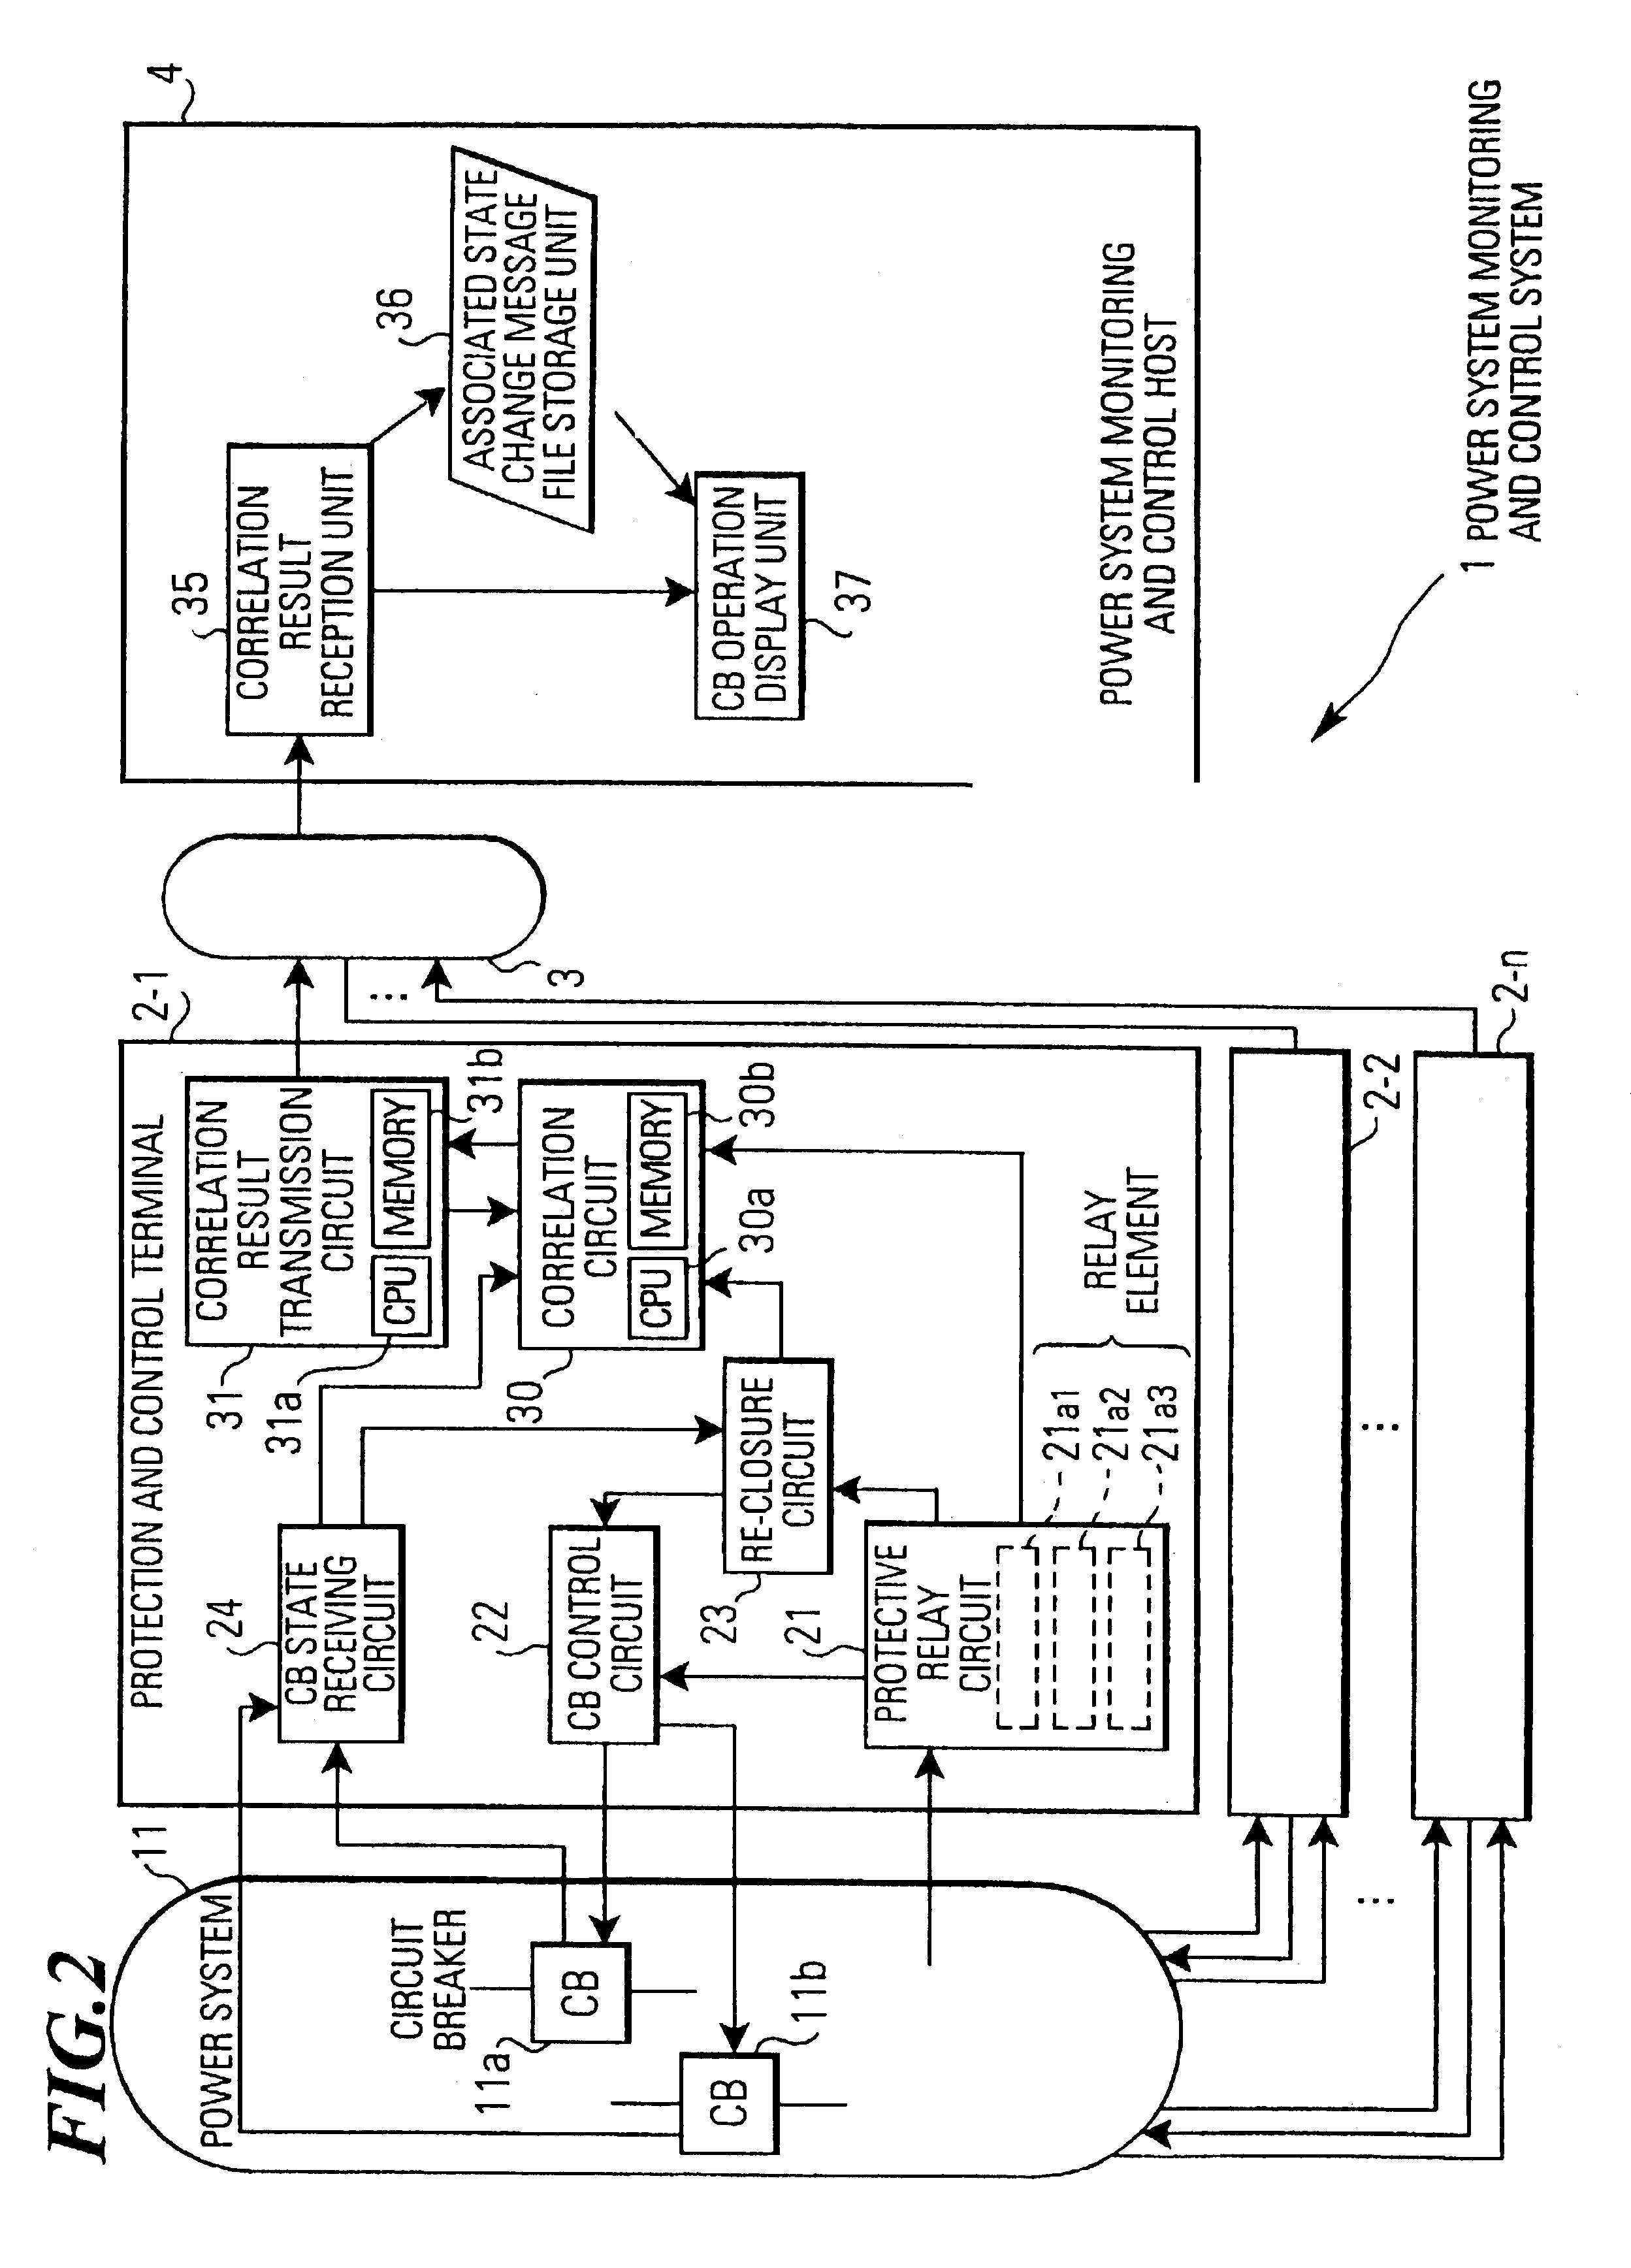 Electric power system protection and control system